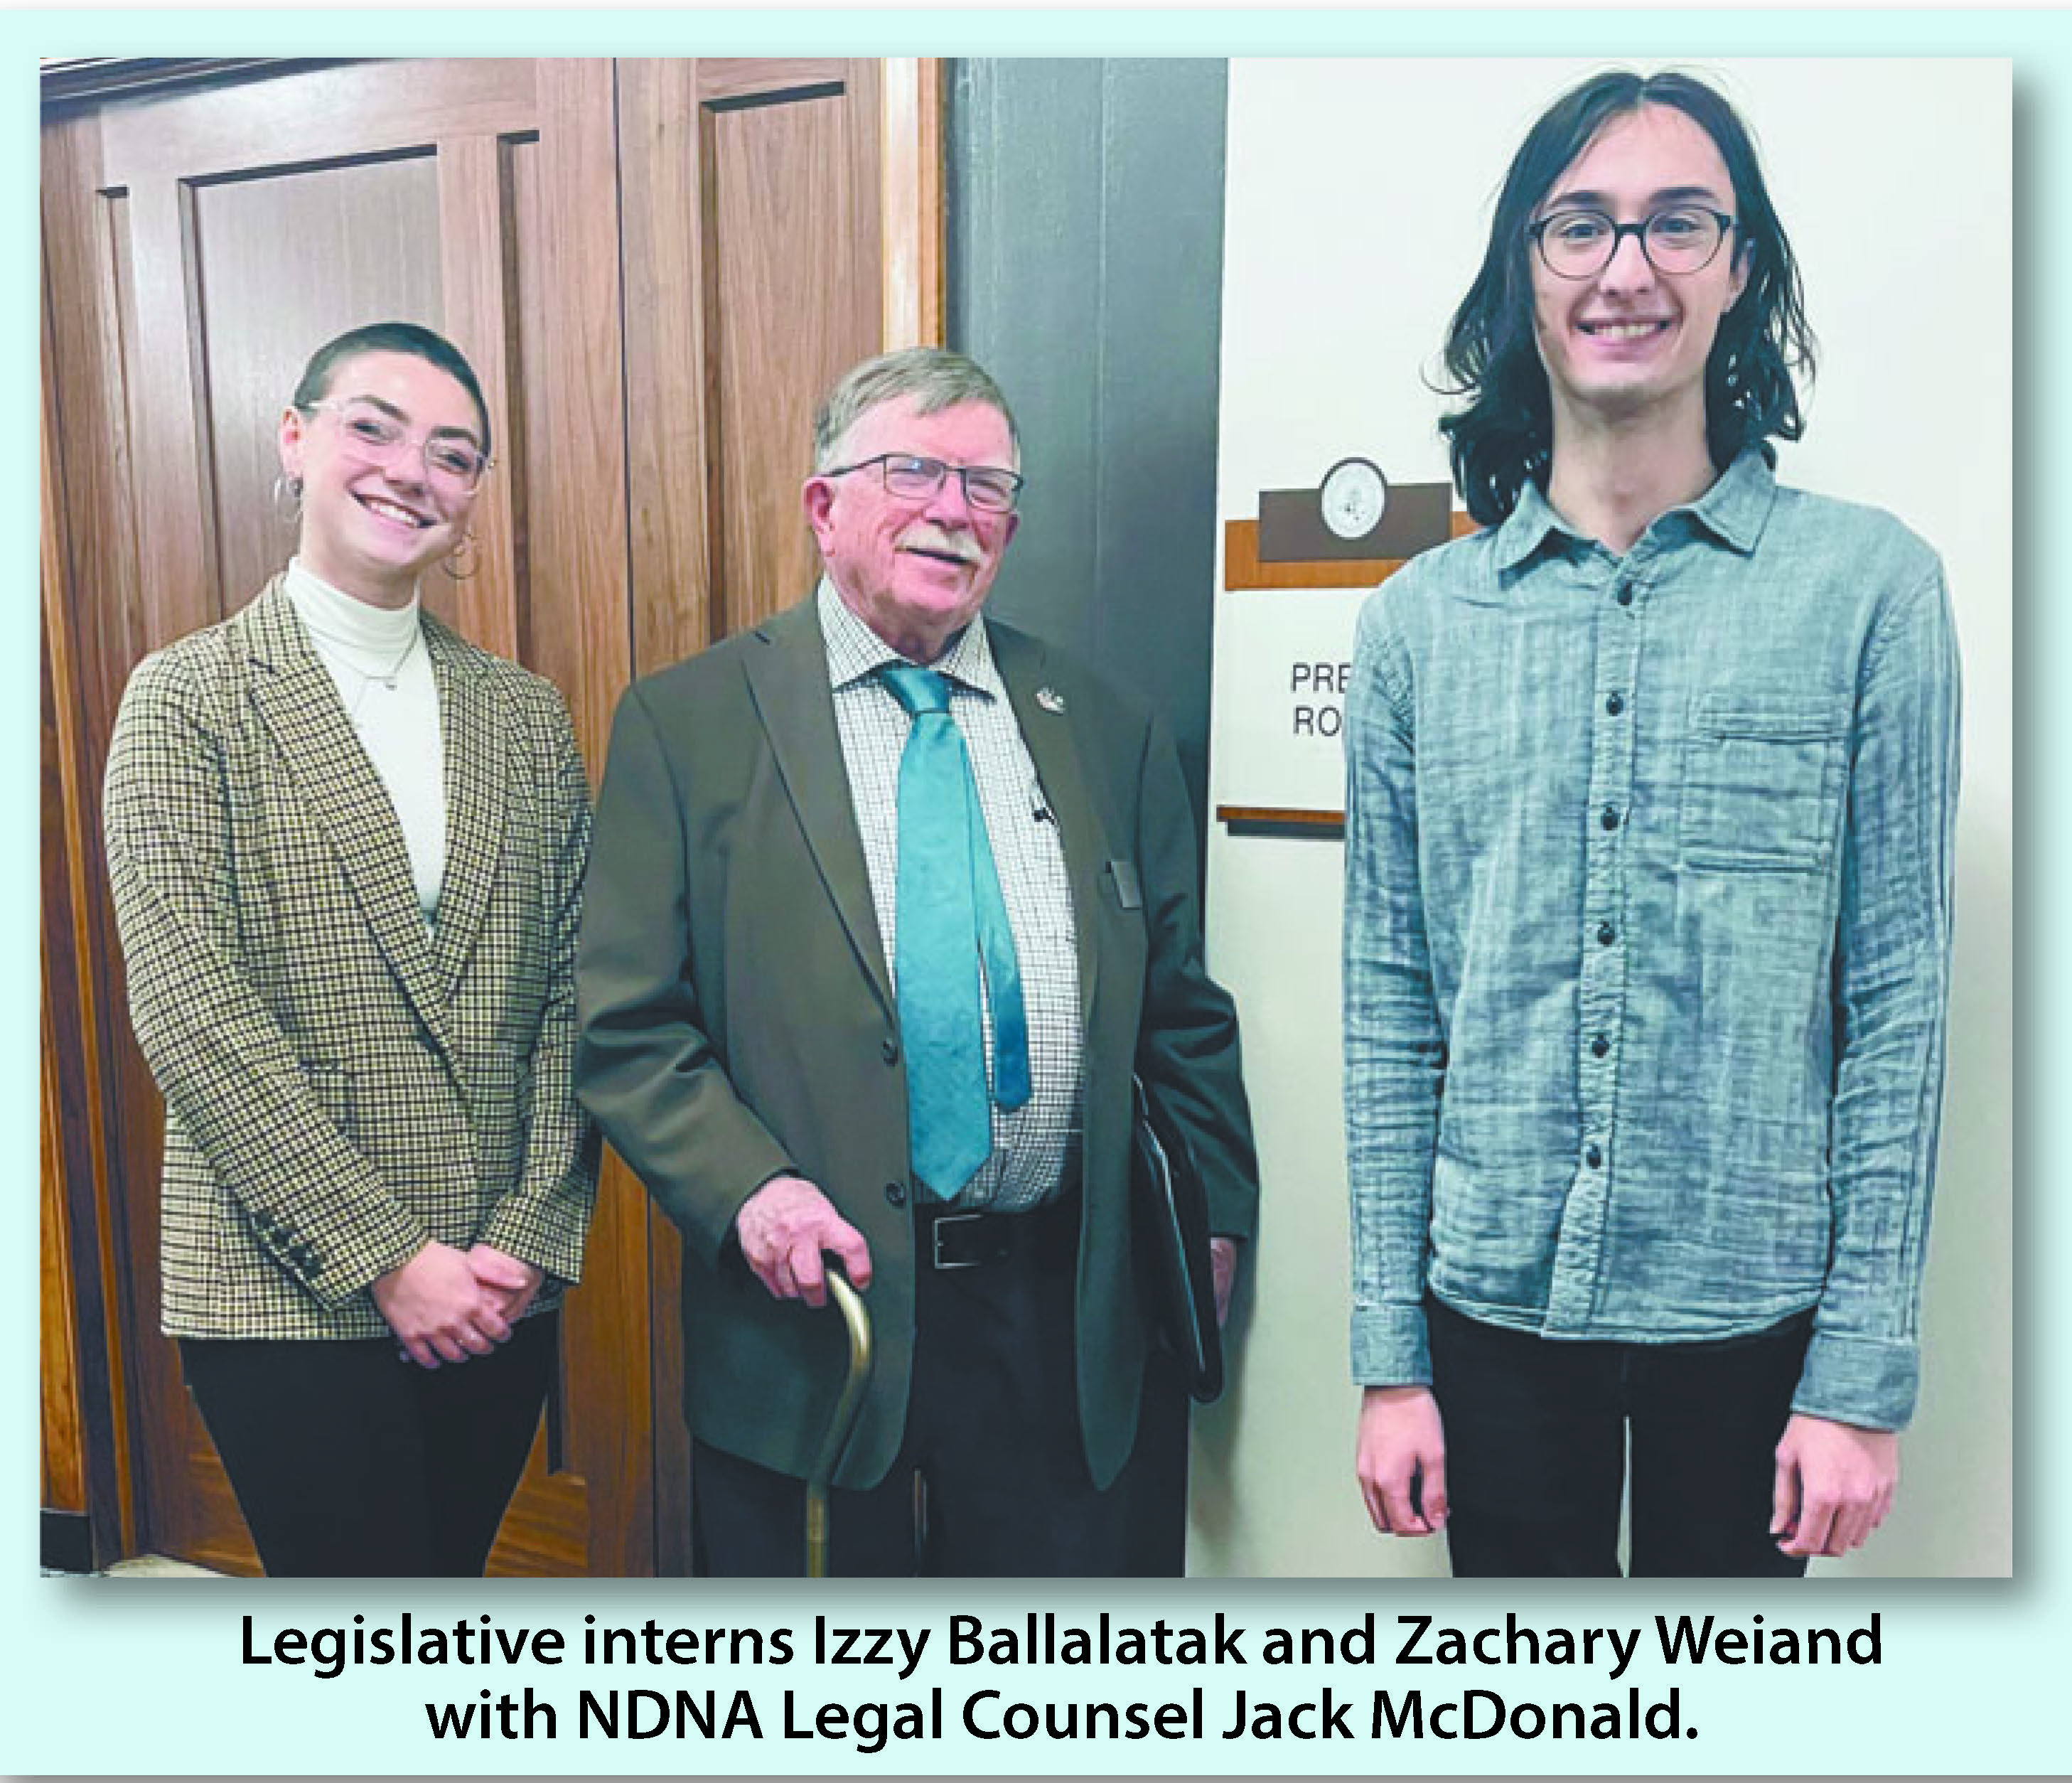 Legislative session opens; new legislative interns to provide weekly stories to papers